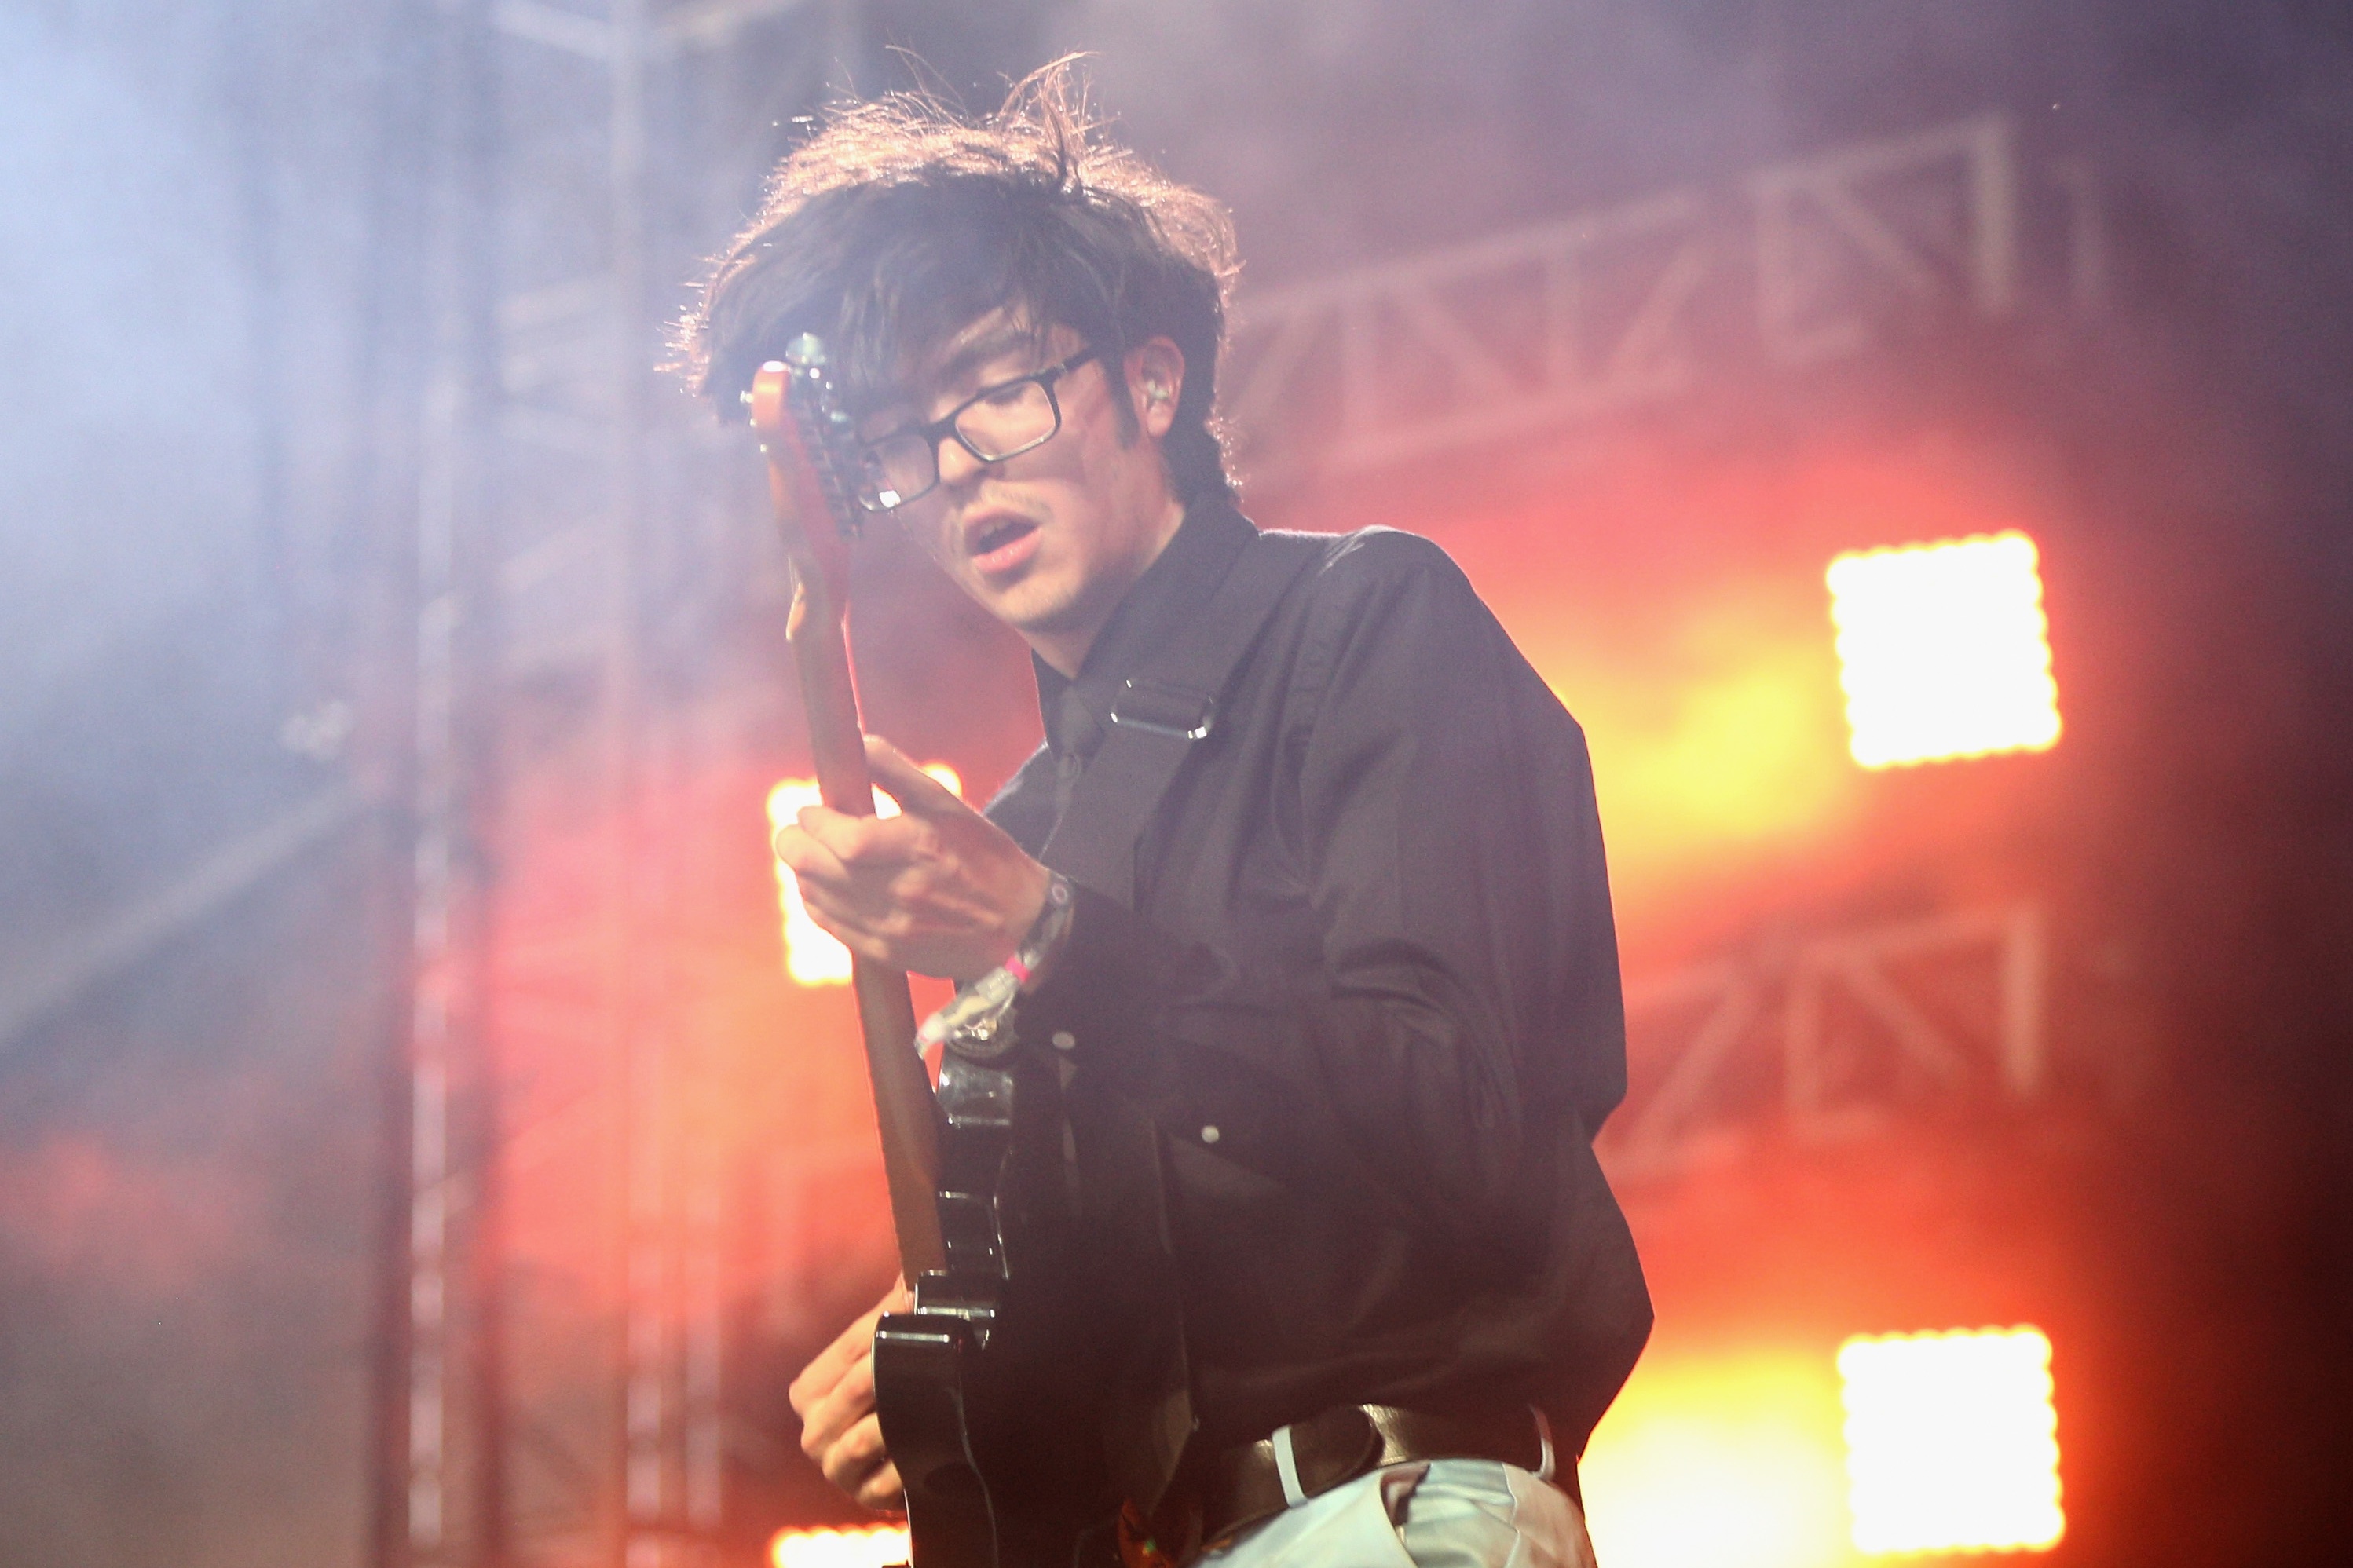 Car Seat Headrest Cover Nine Inch Nails, David Bowie and More on Covers EP